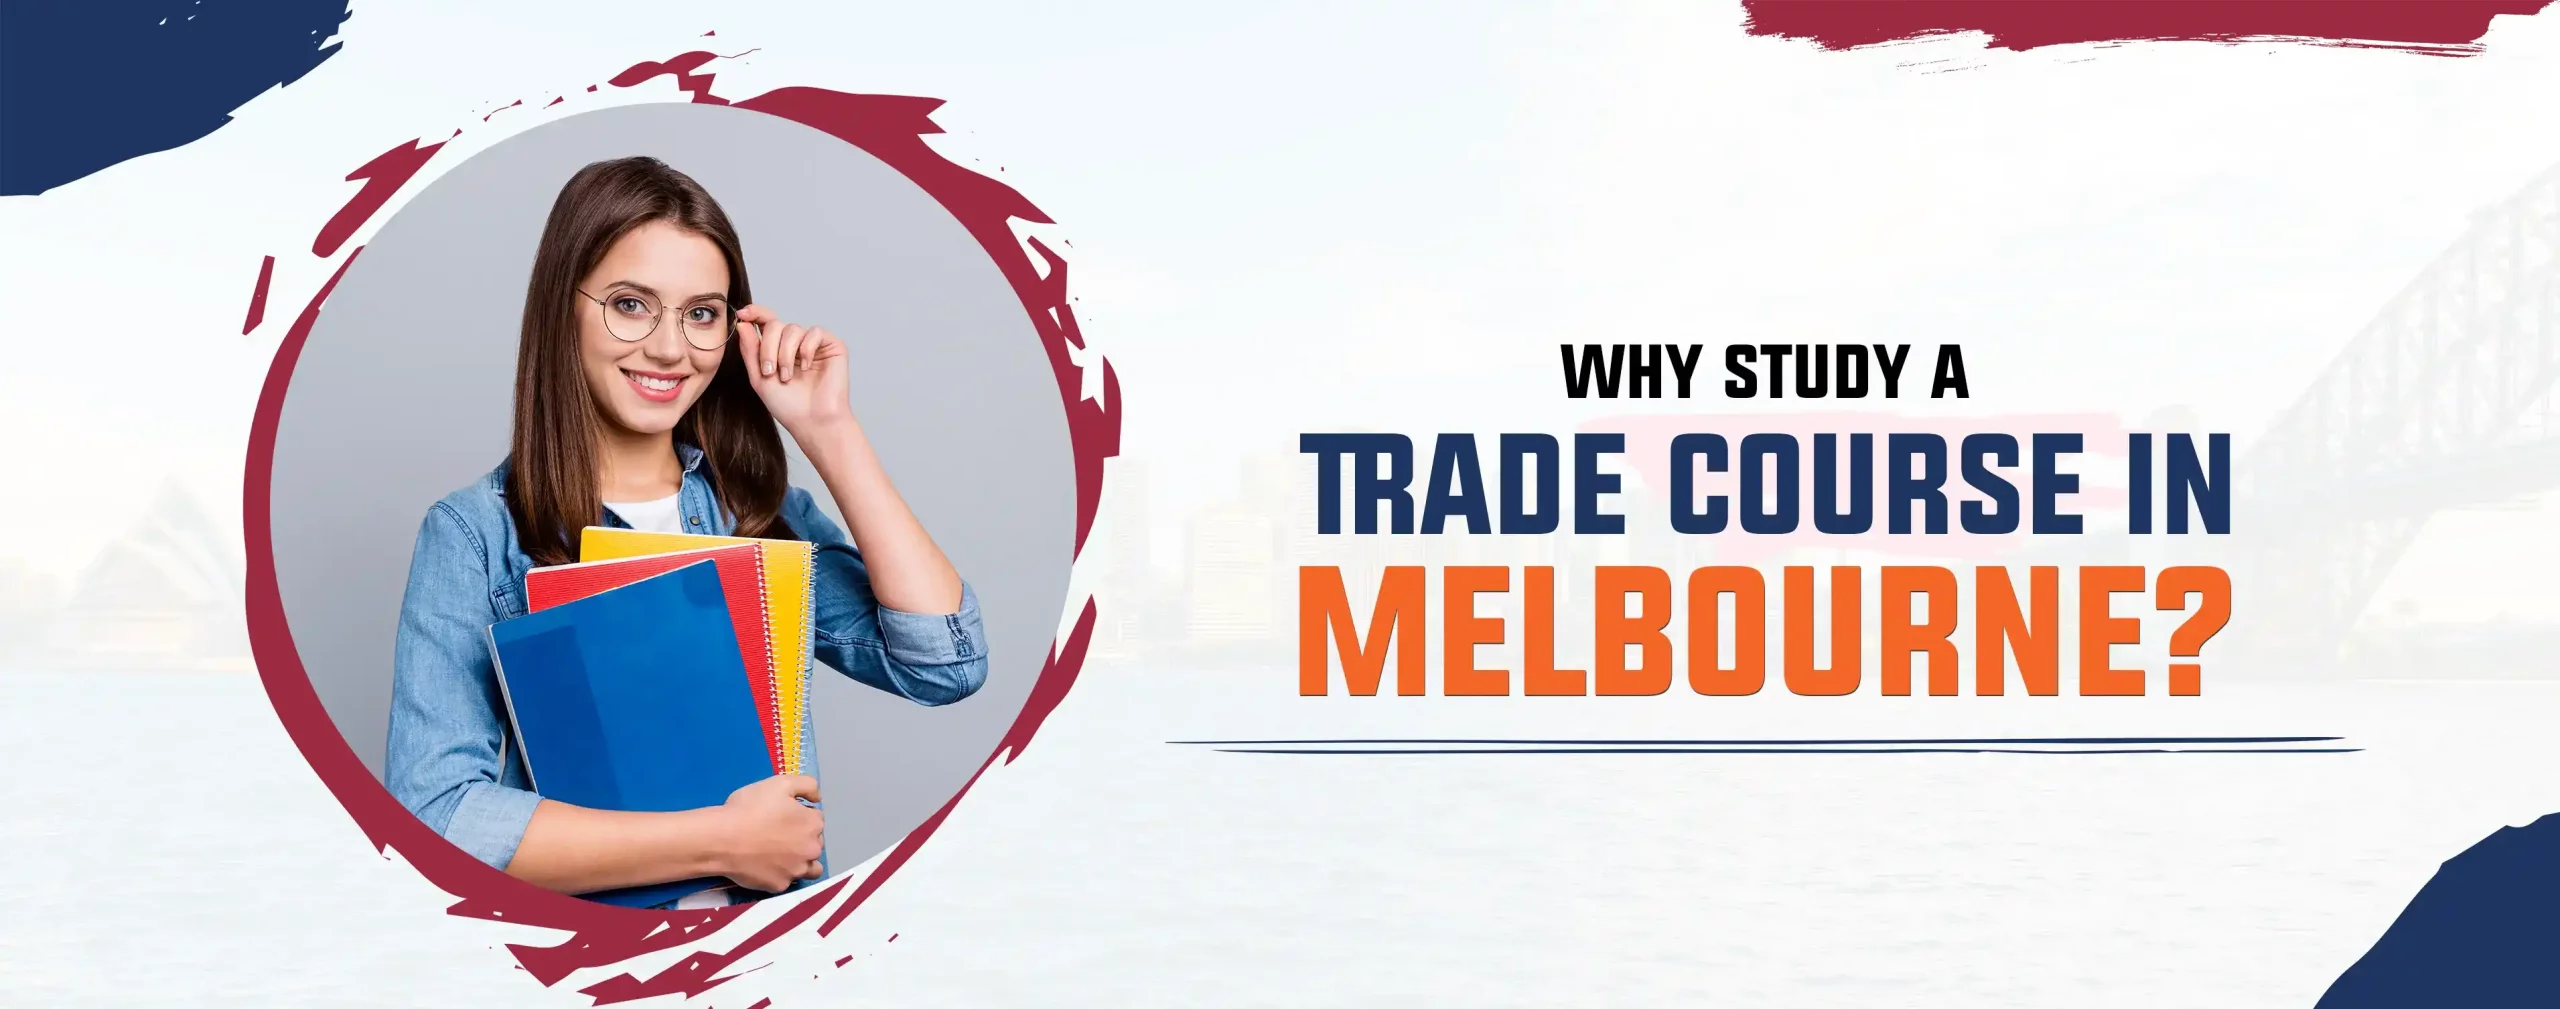 Why Study a Trade Course in Melbourne?